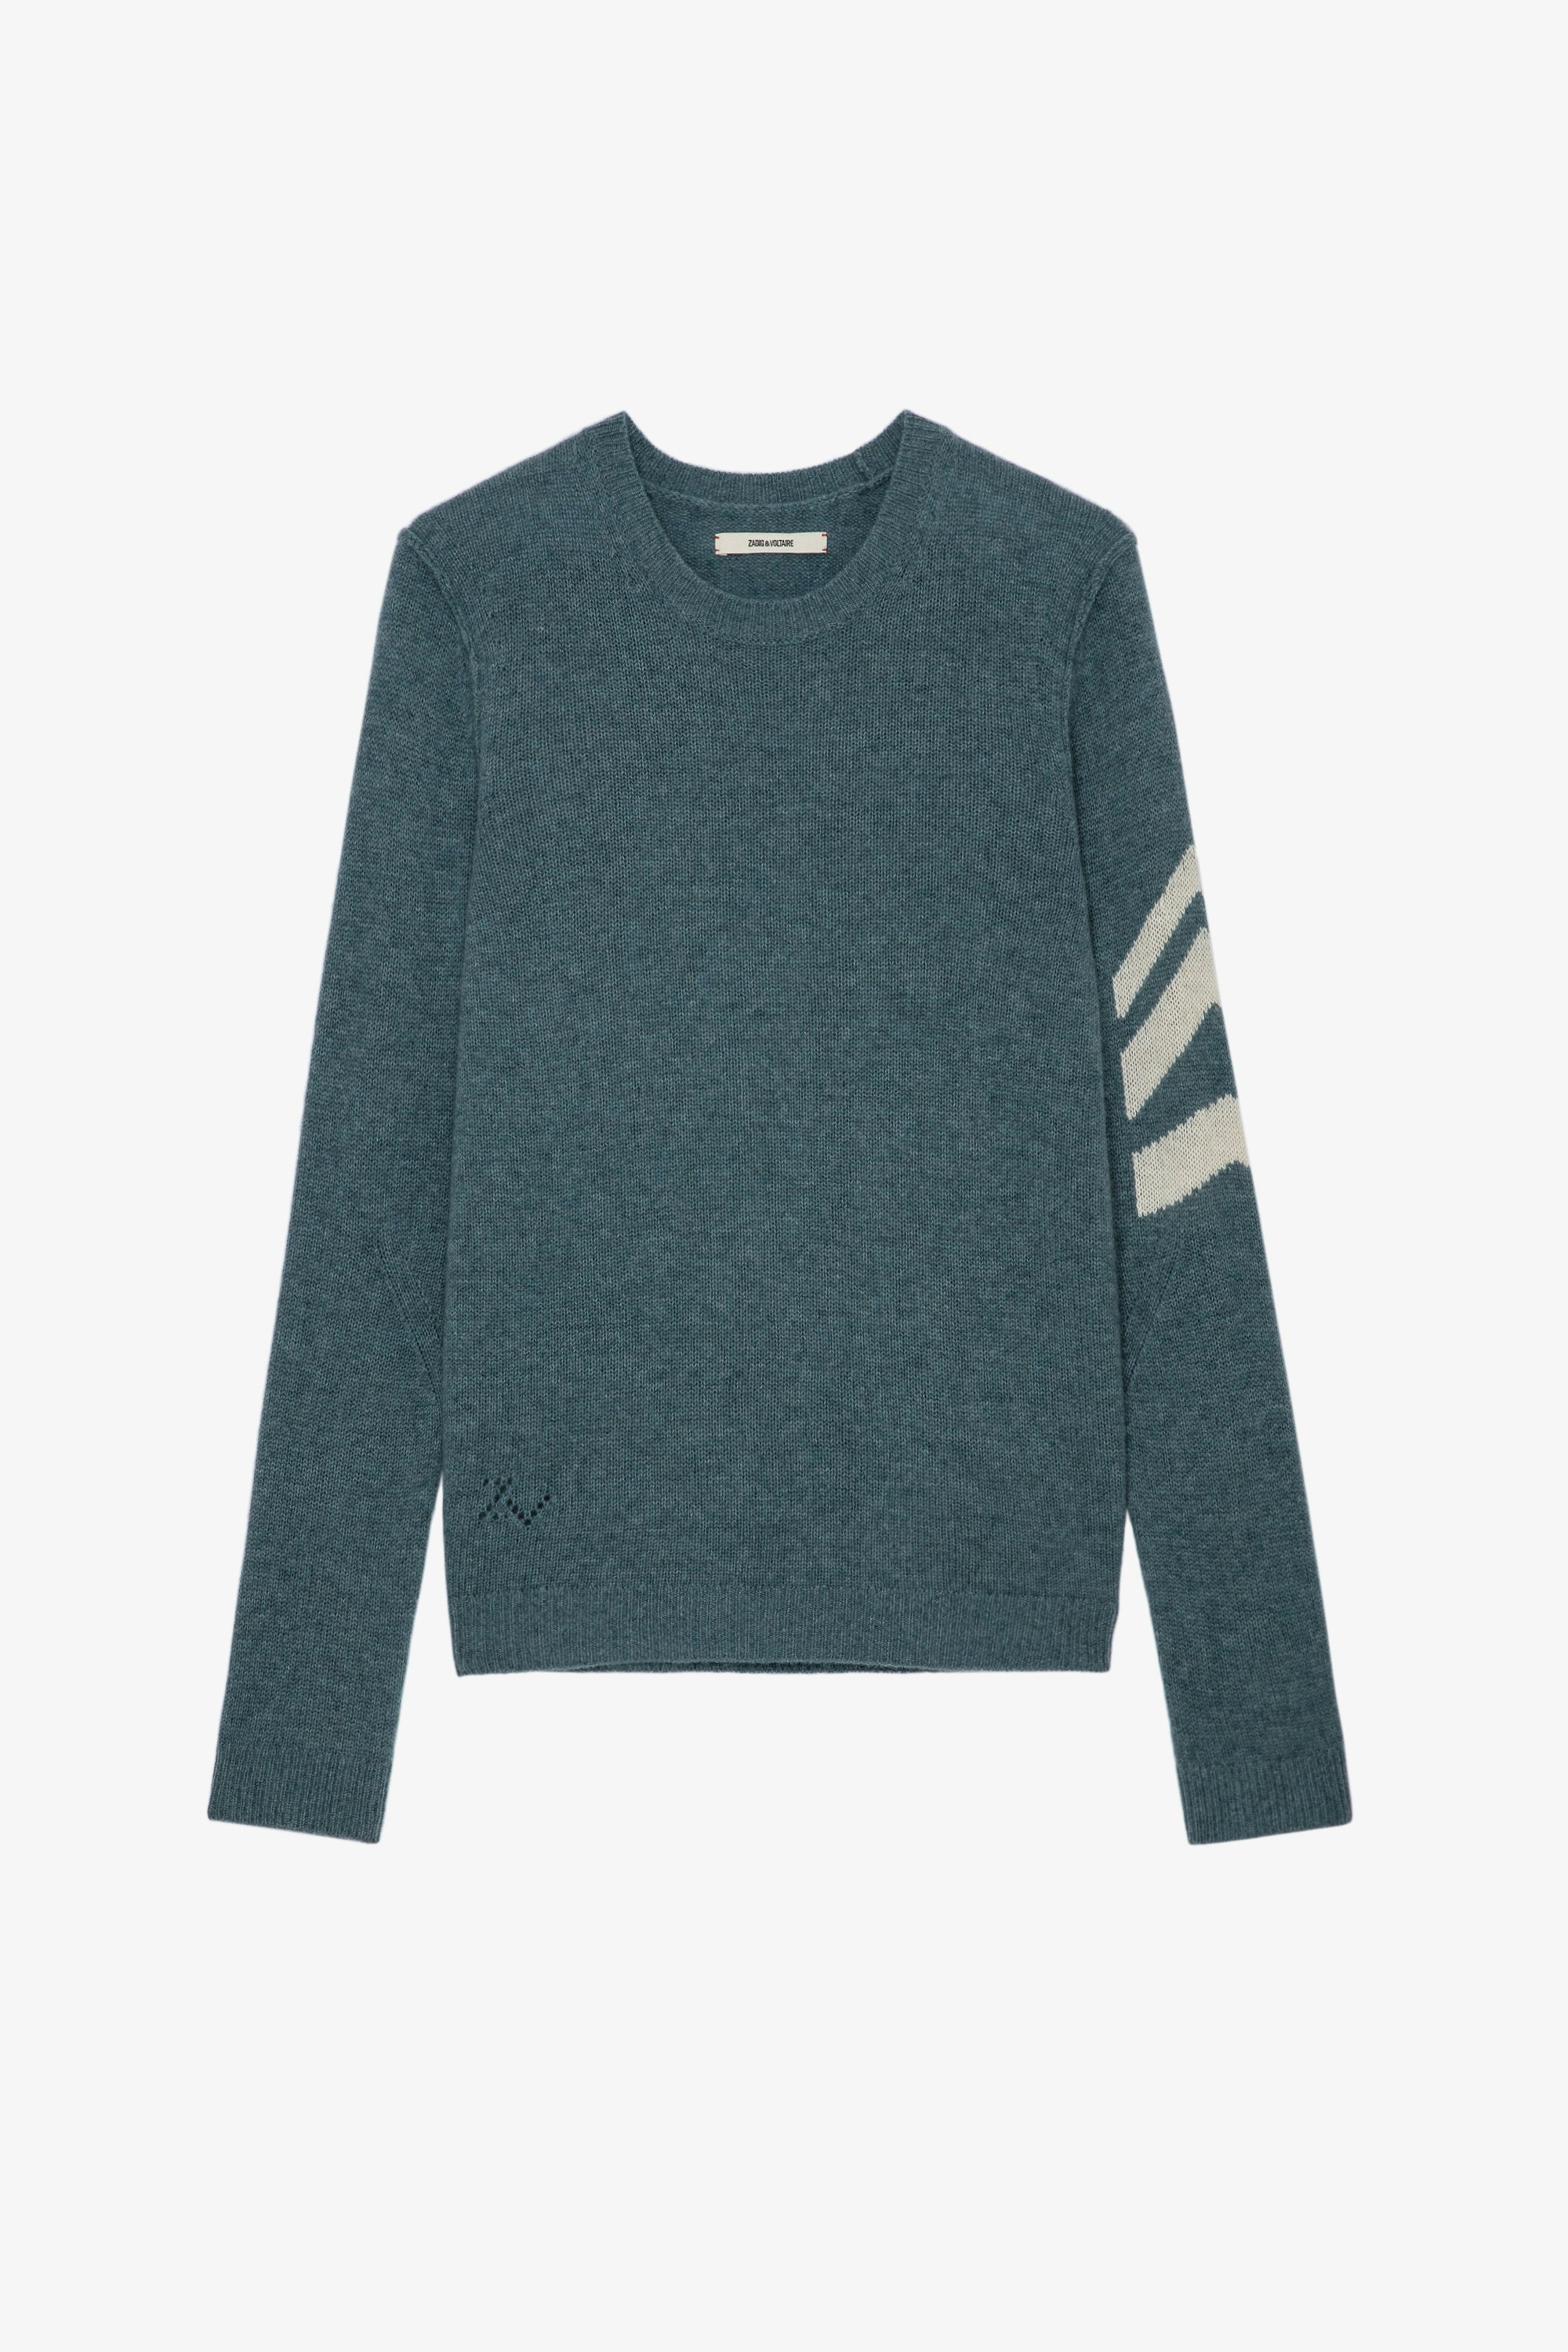 Kennedy Arrow Cashmere Jumper Men’s green cashmere jumper featuring arrows on the sleeve